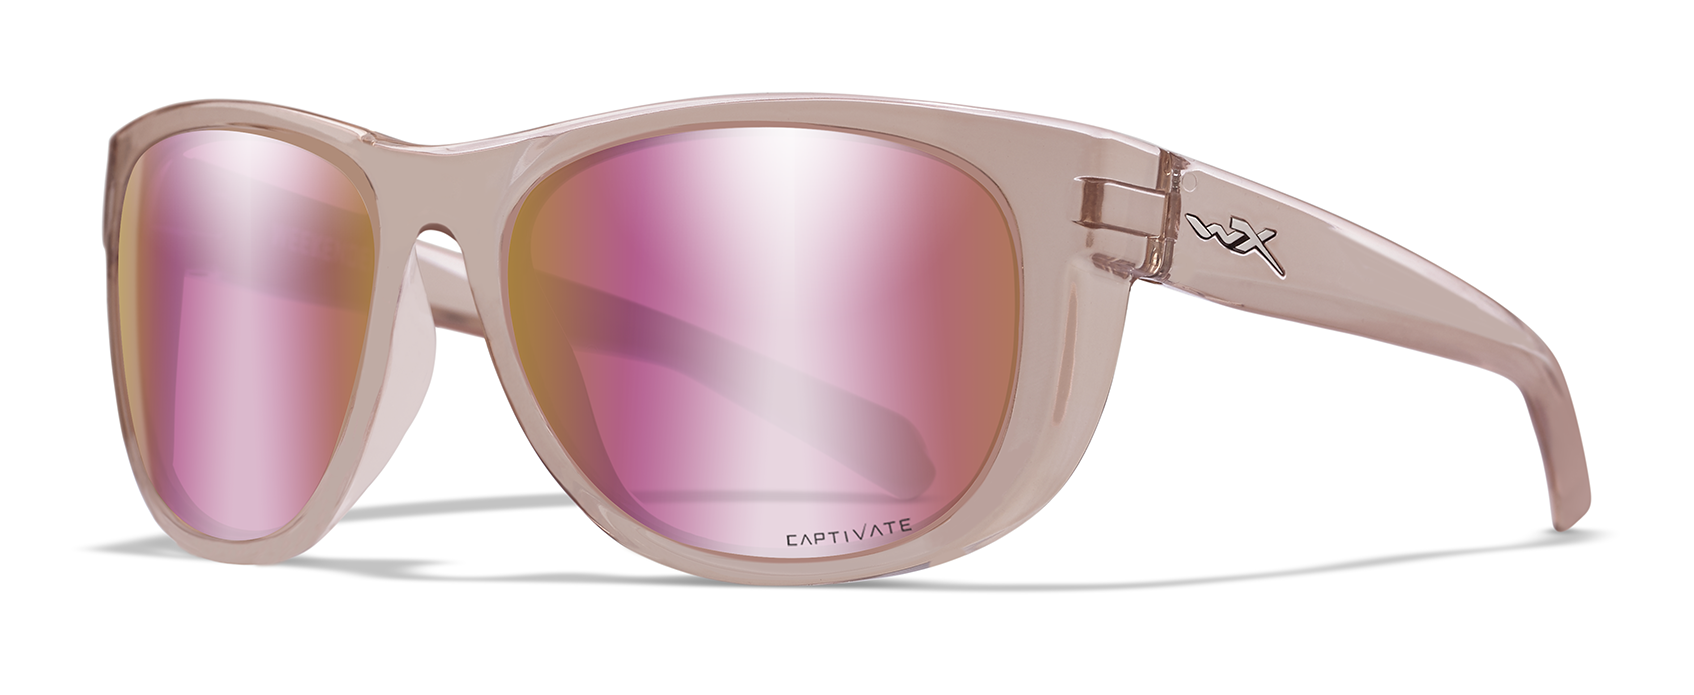 Best Women's Fishing Sunglasses of 2021 | SportRx.com - Transforming your  visual experience.